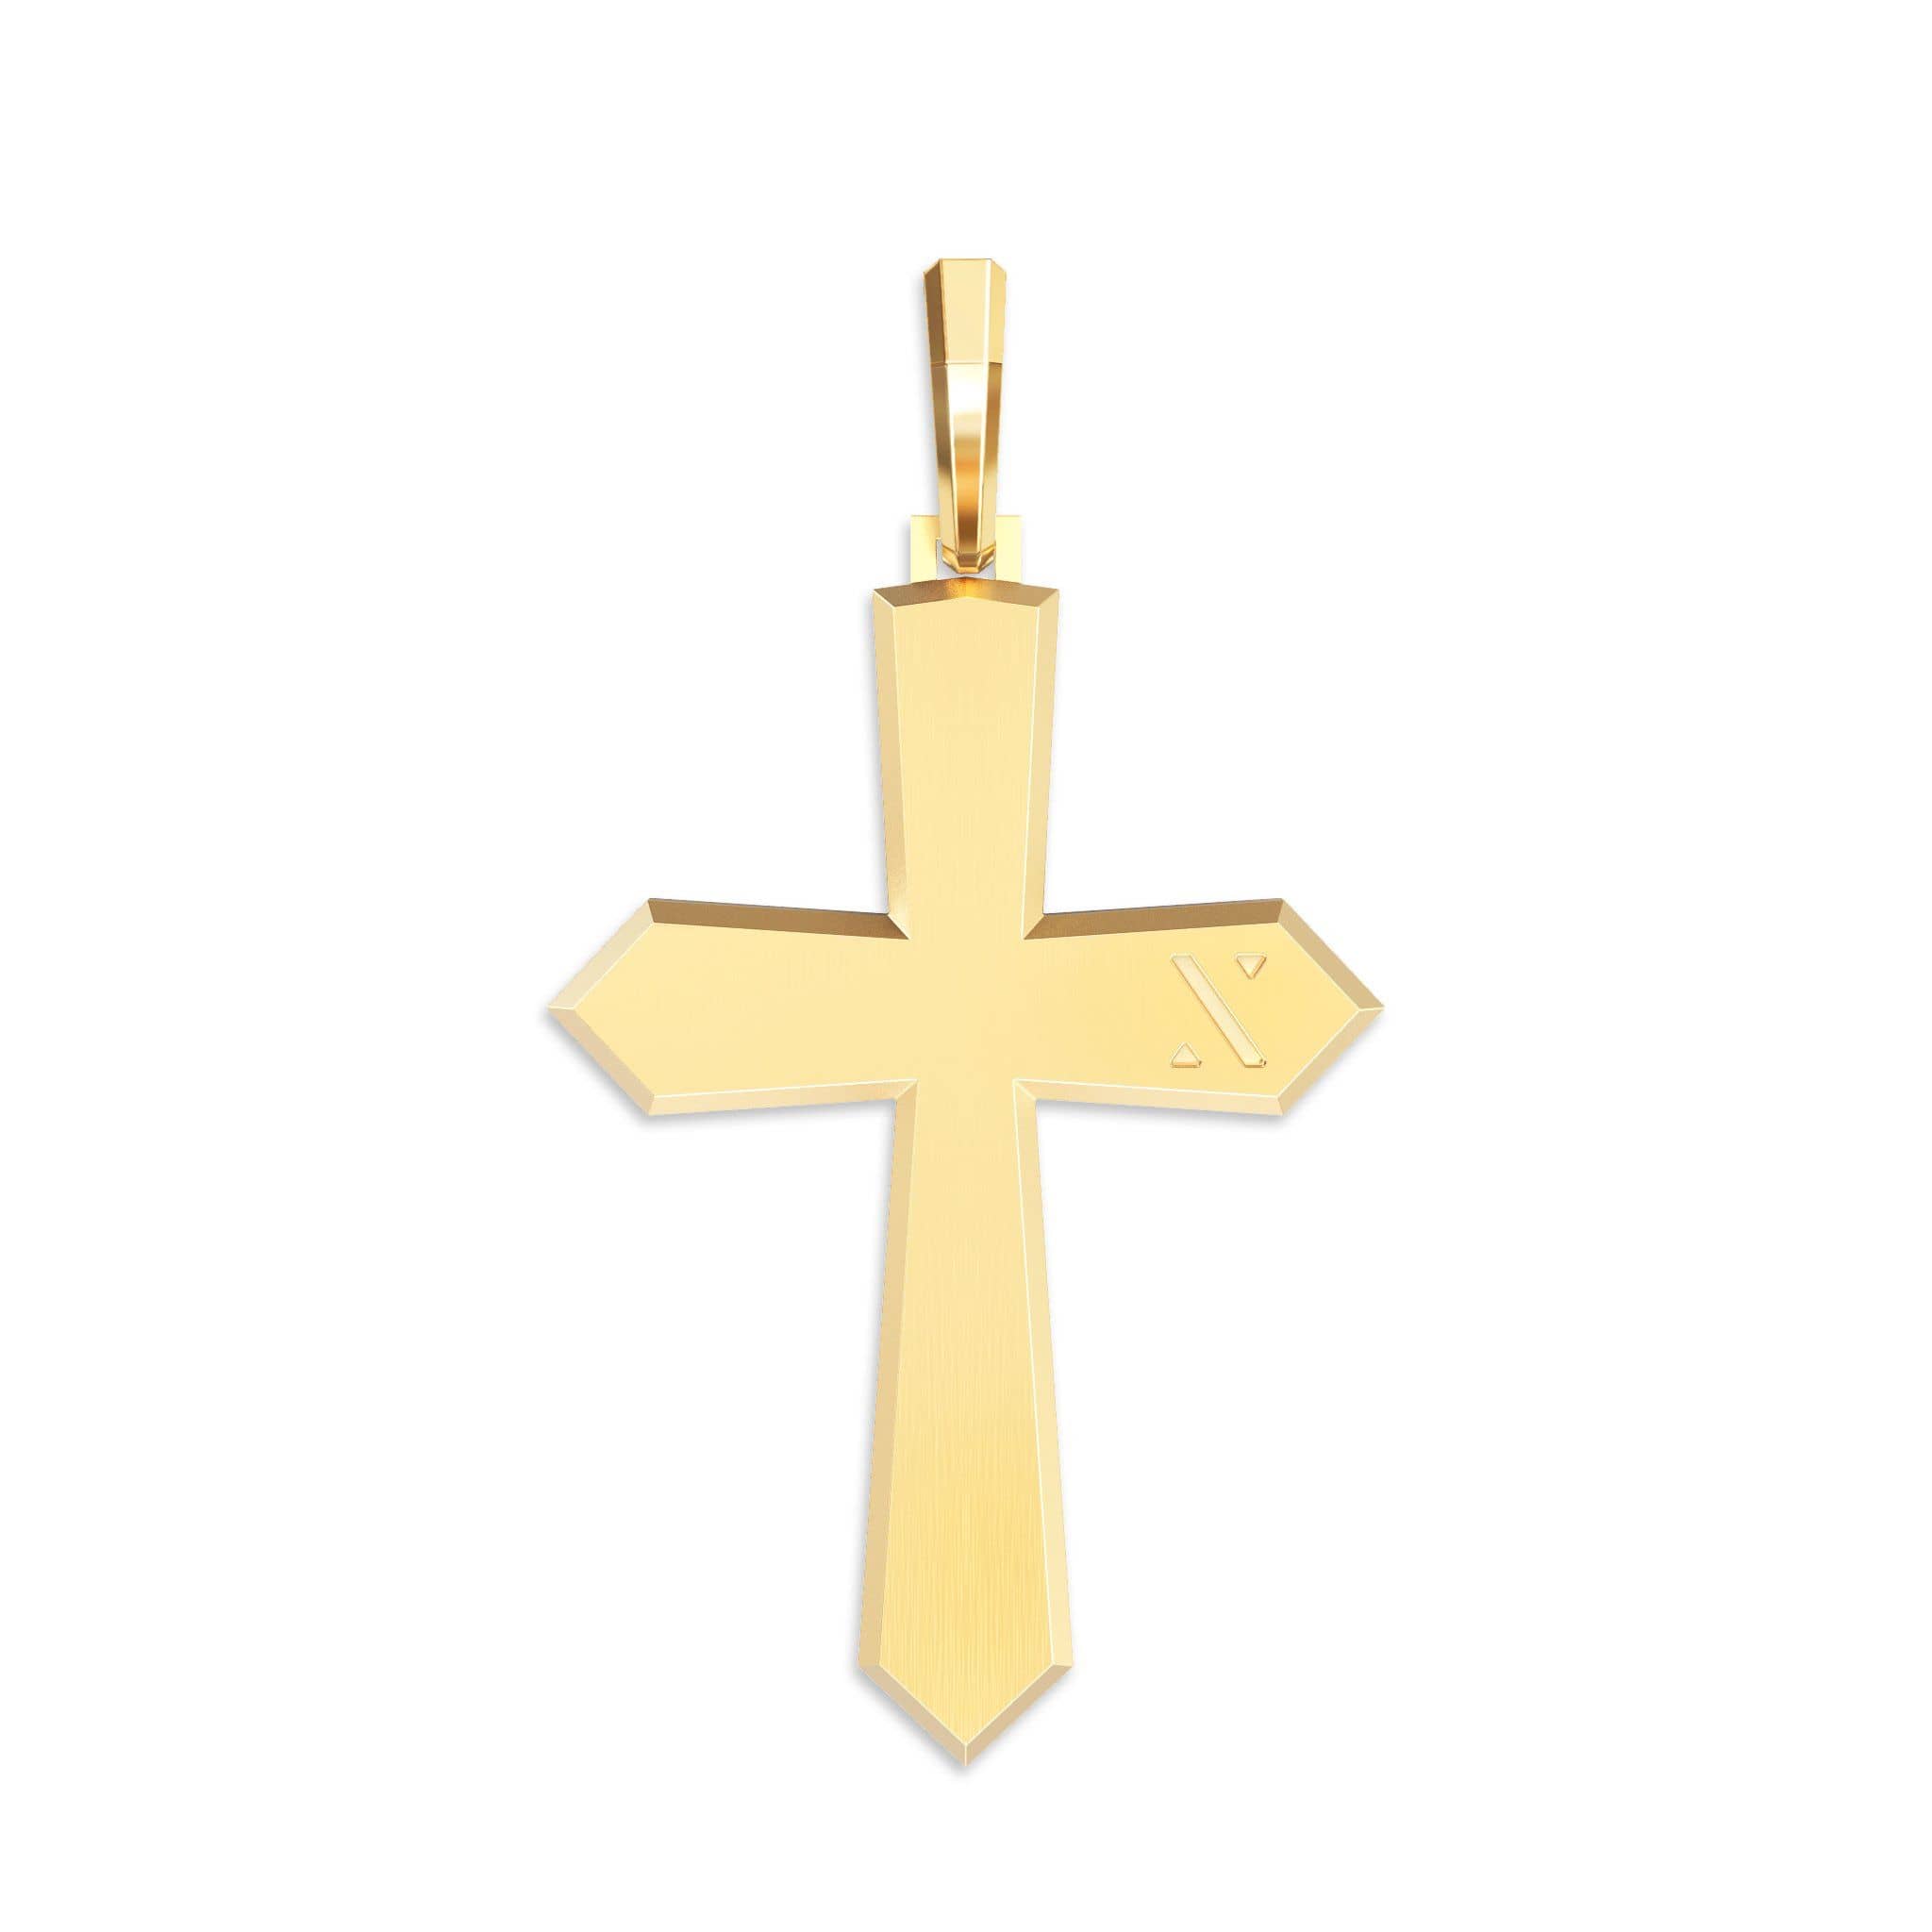 The Crusade Pendant | Solid Gold Pendant for Your Chain | JAXXON